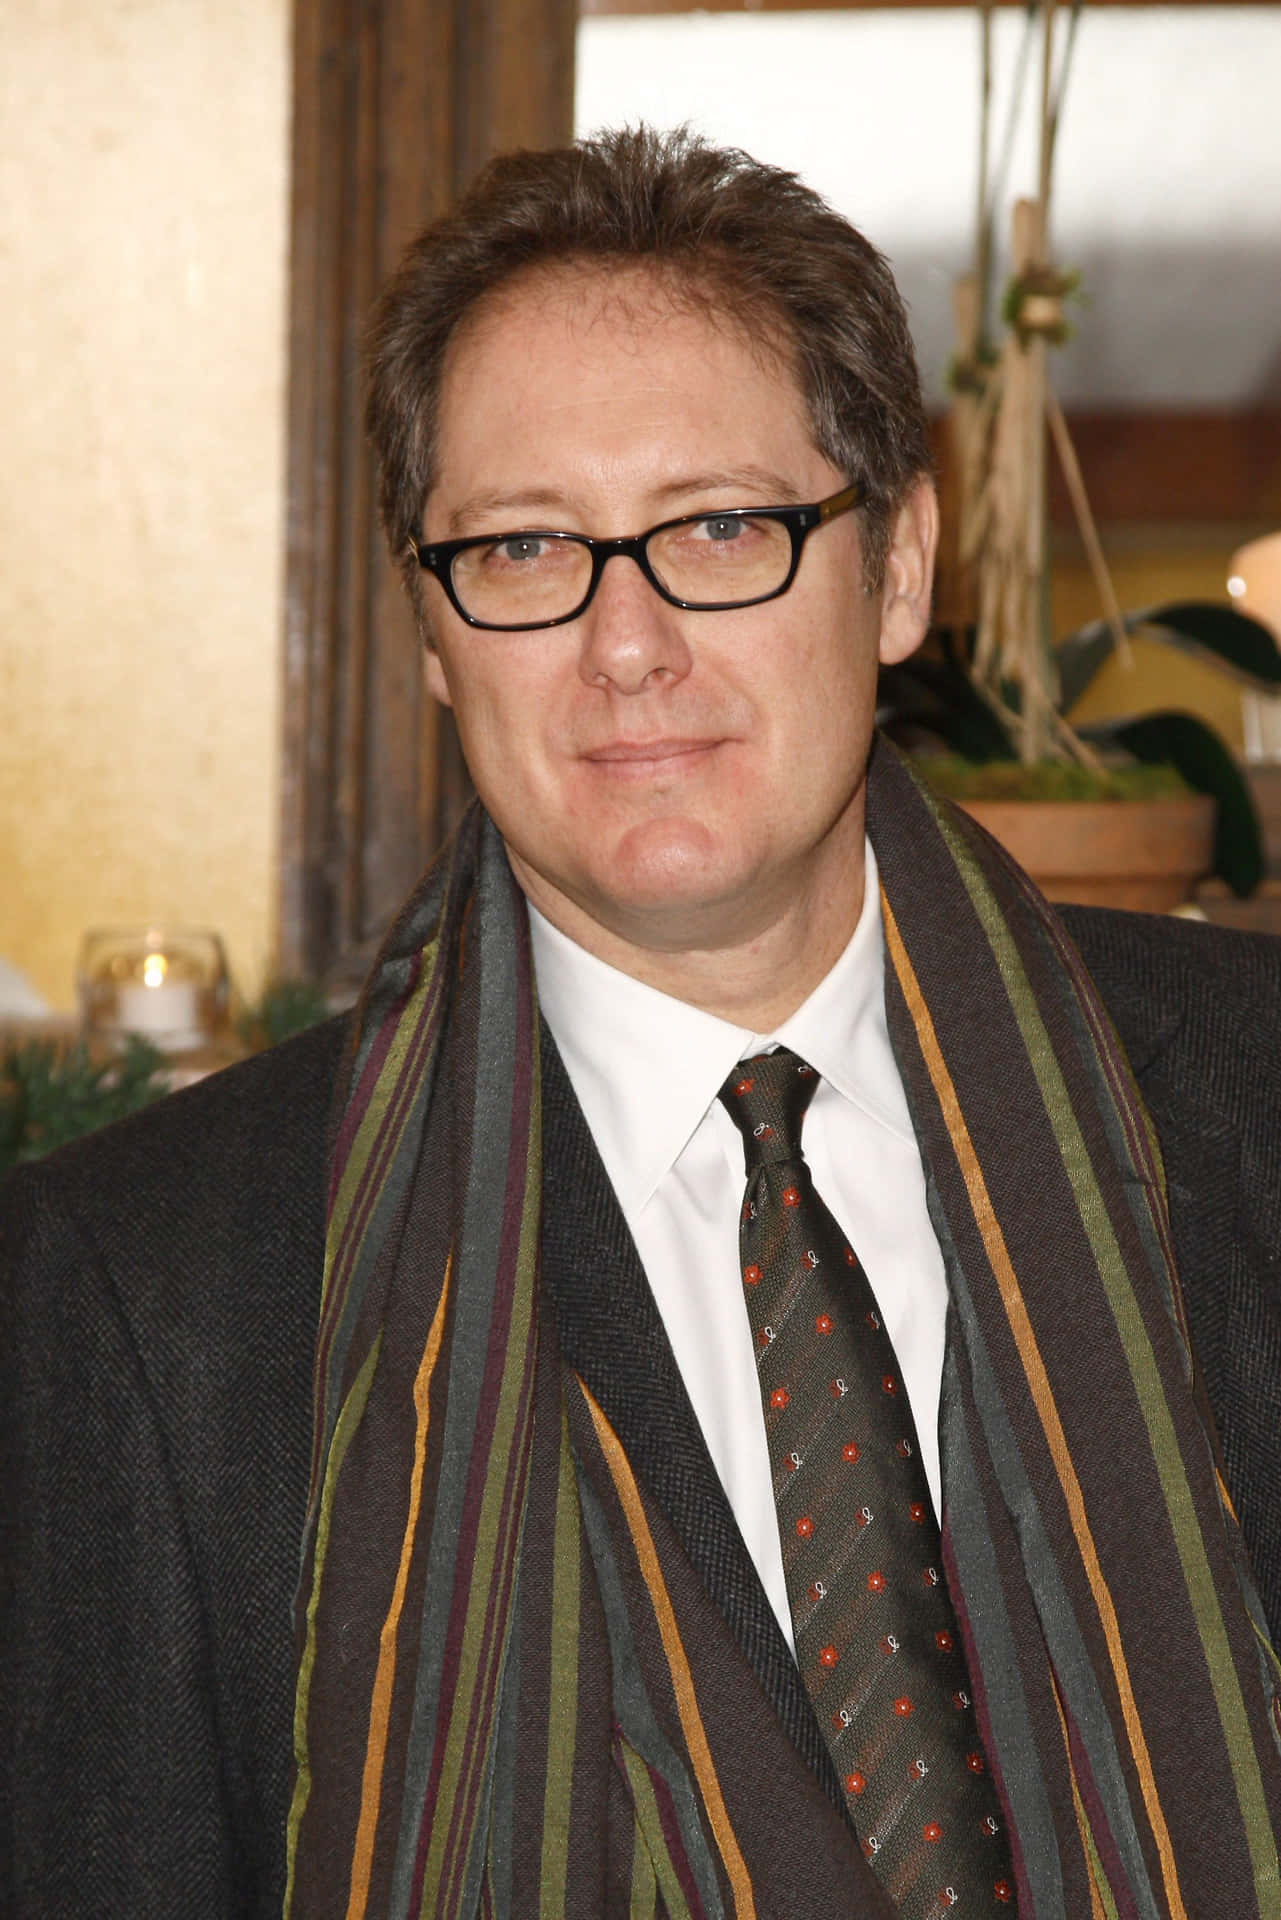 Caption: Acclaimed Actor James Spader In A Charming Black And White Portrait. Background